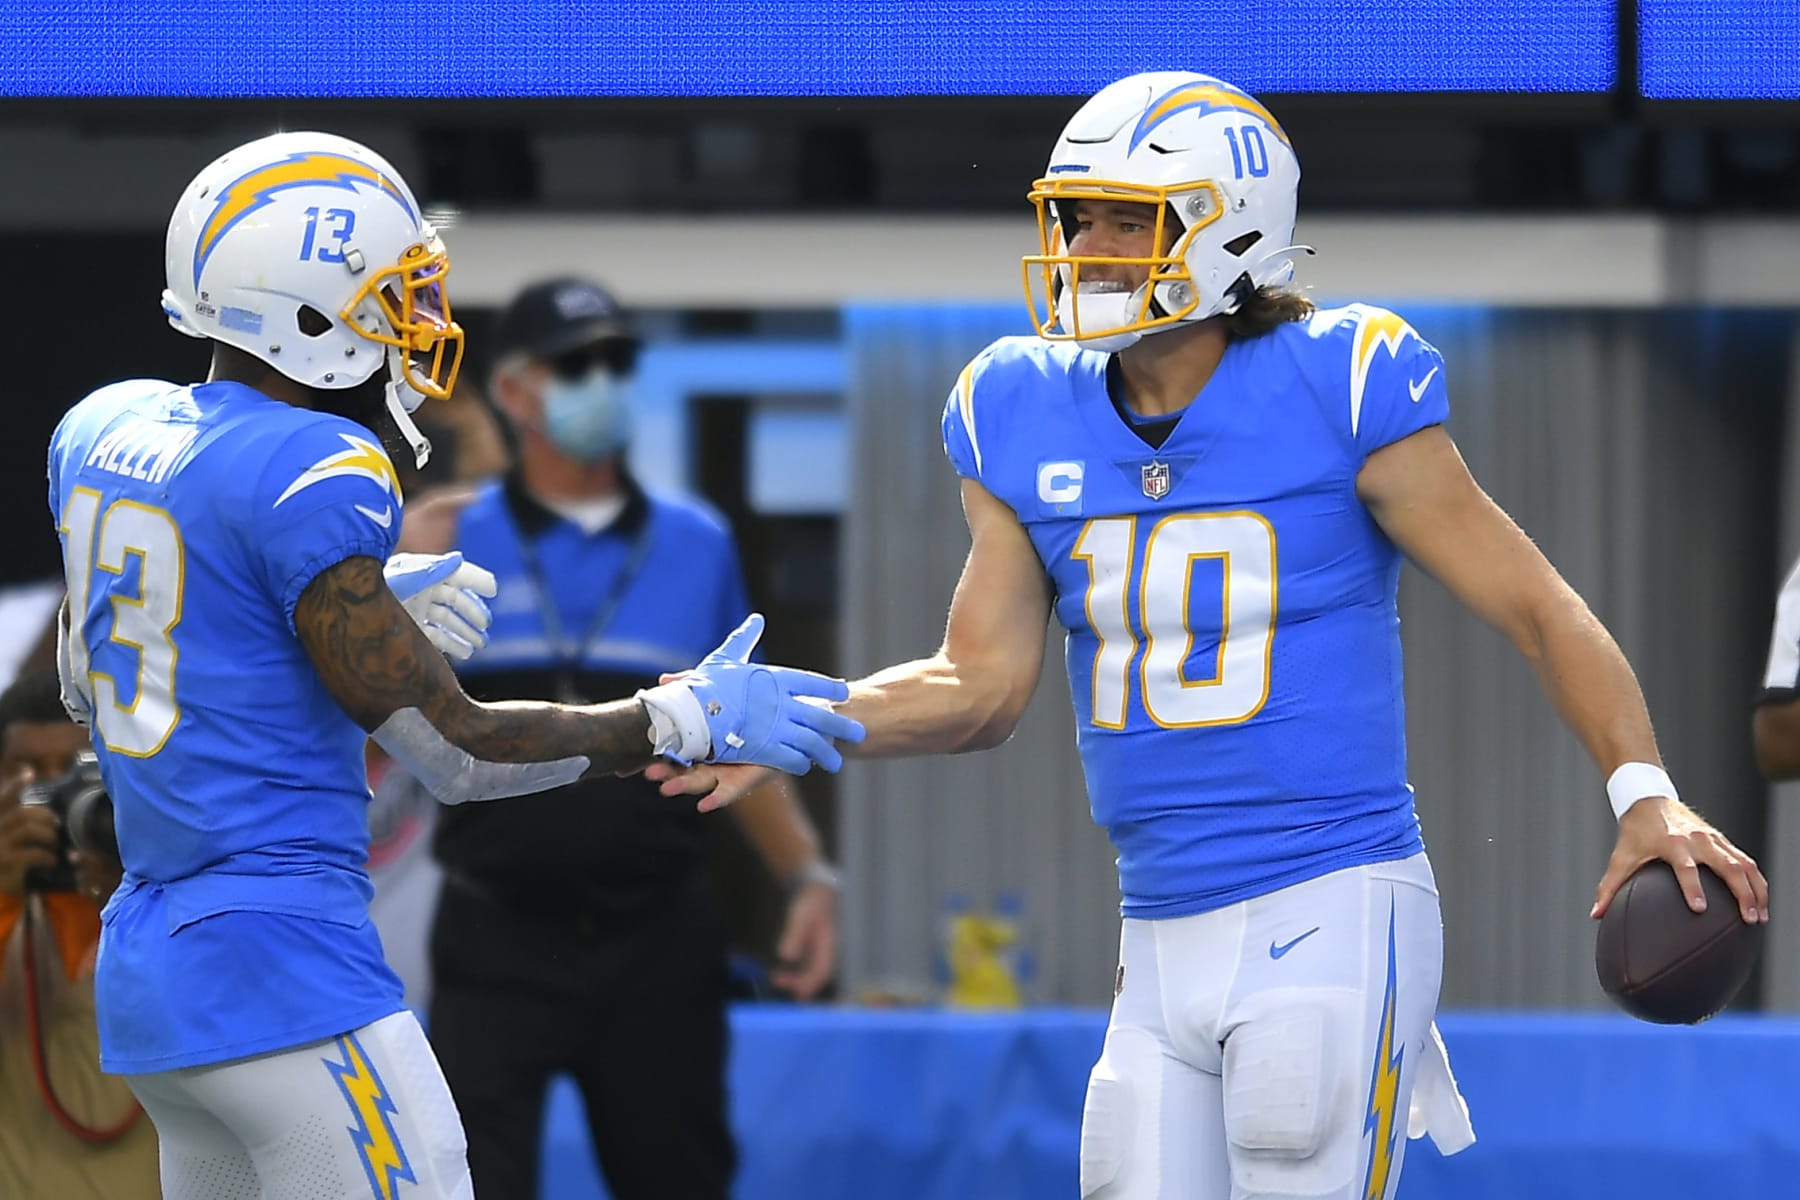 Fantasy Football: 5 QB-WR duos to consider stacking in 2022